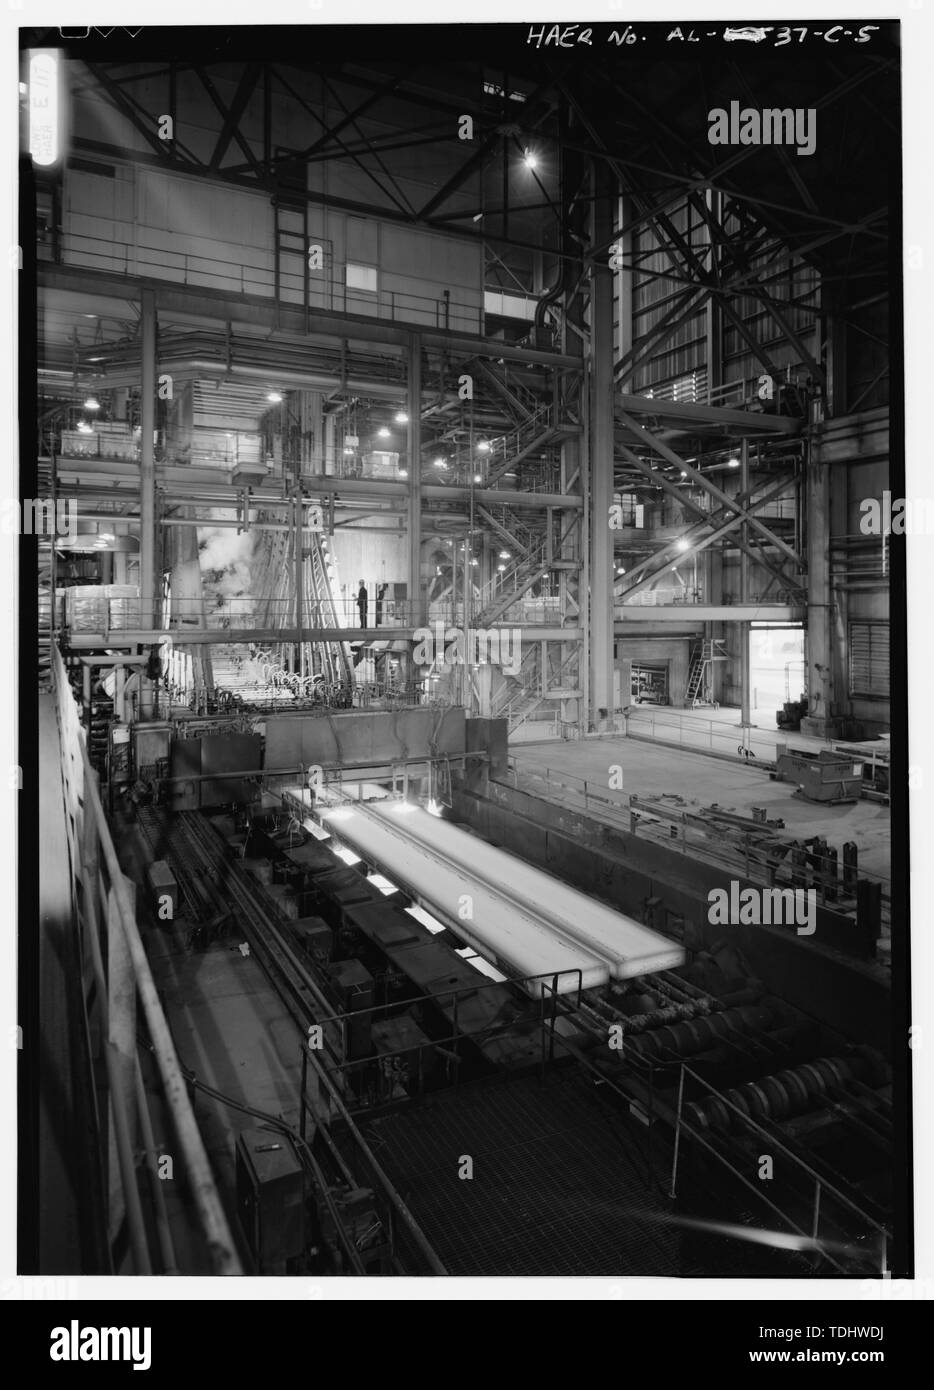 OVERVIEW LOOKING SOUTH OF CONTAINMENT SYSTEM (TOP), SLAB CASTING MACHINE AND RUN OUT WITH TRAVELING TORCH. MACHINE IS CASTING IN TWIN MOLD. - U.S. Steel, Fairfield Works, Continuous Caster, Fairfield, Jefferson County, AL Stock Photo